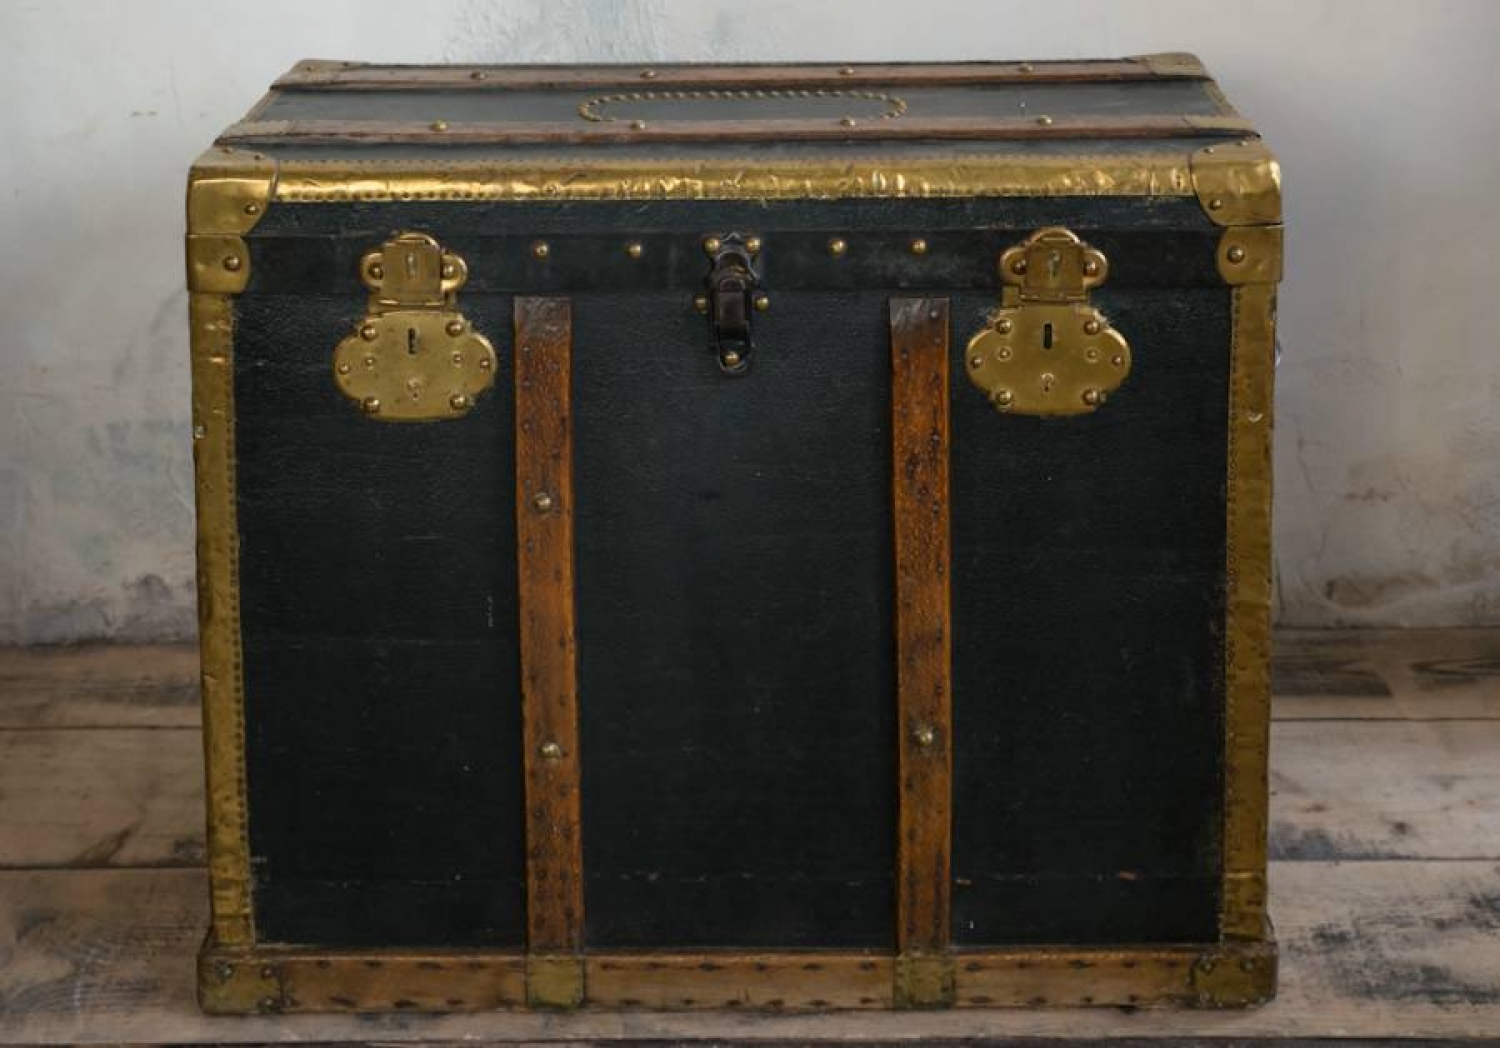  Studded Coaching Trunk mid 19thc